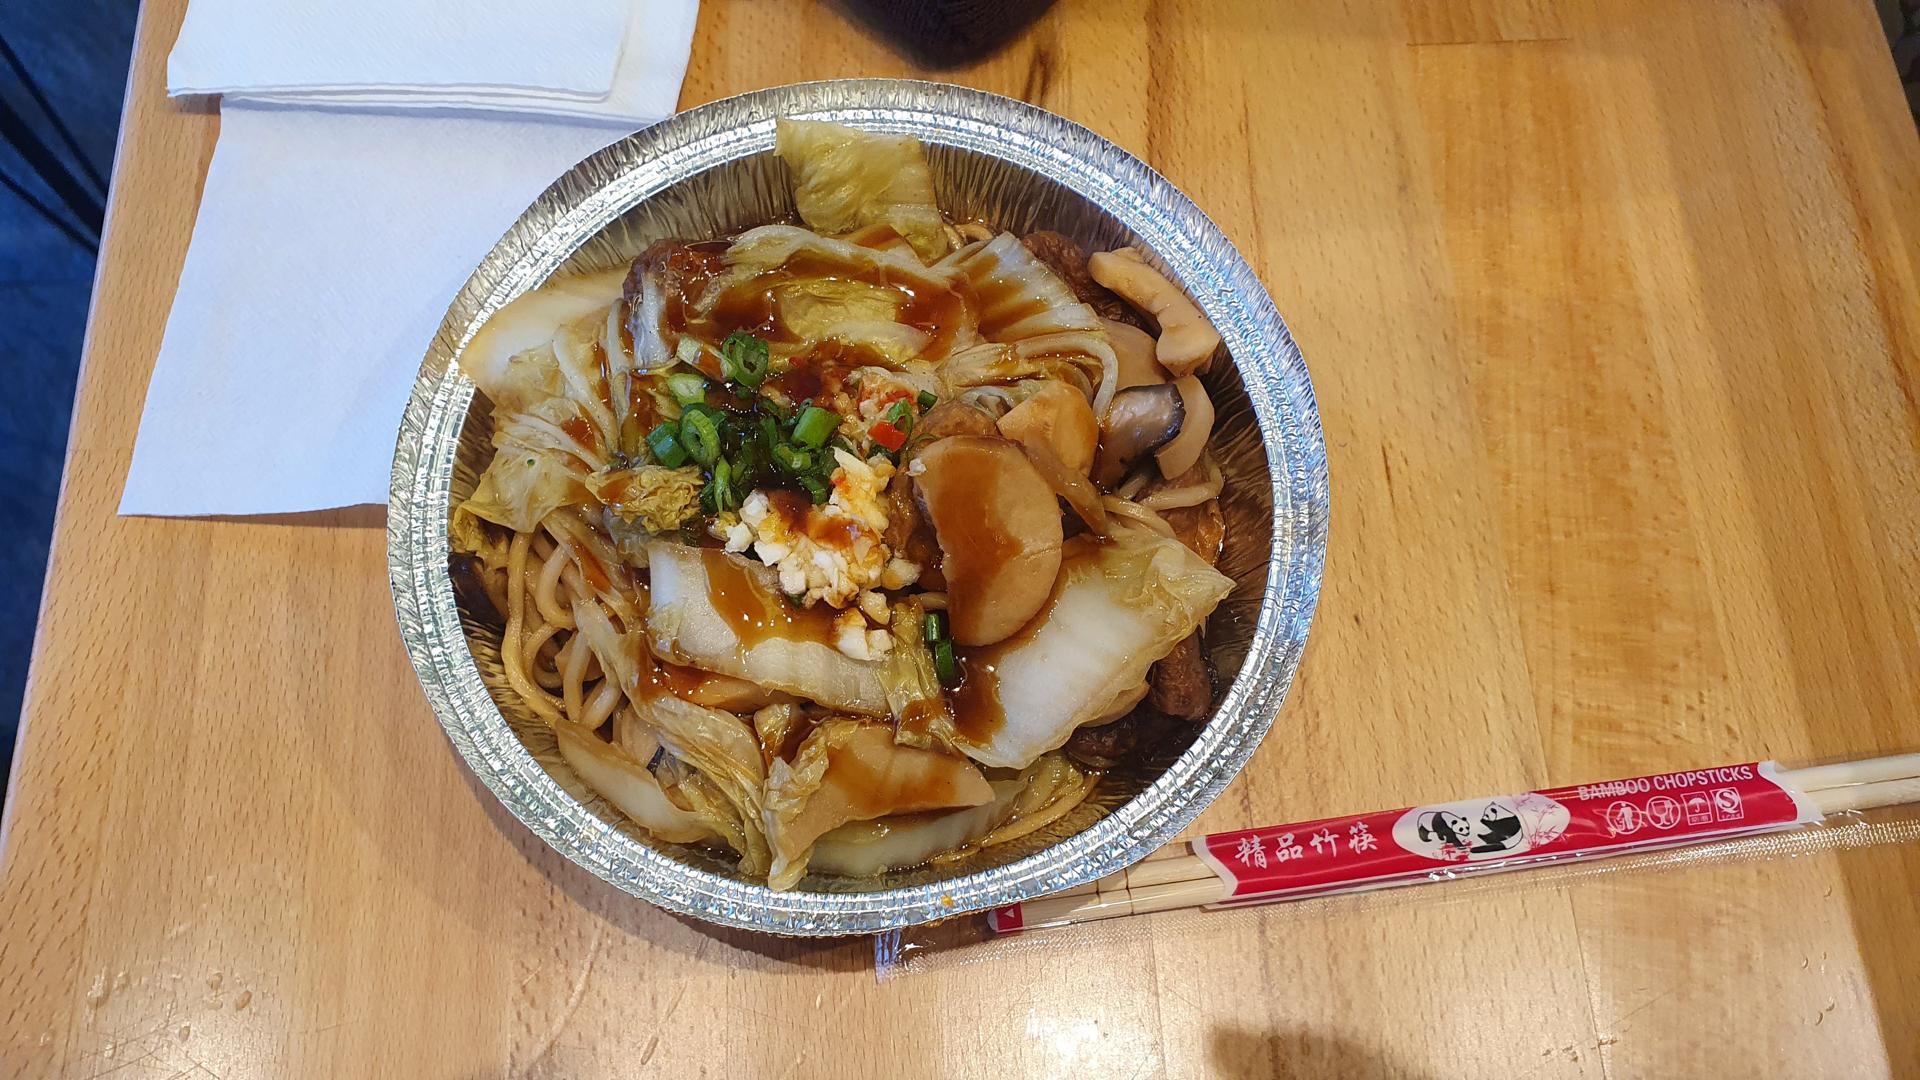 Vegan Chinese food at The Braised Shop in East Village, New York